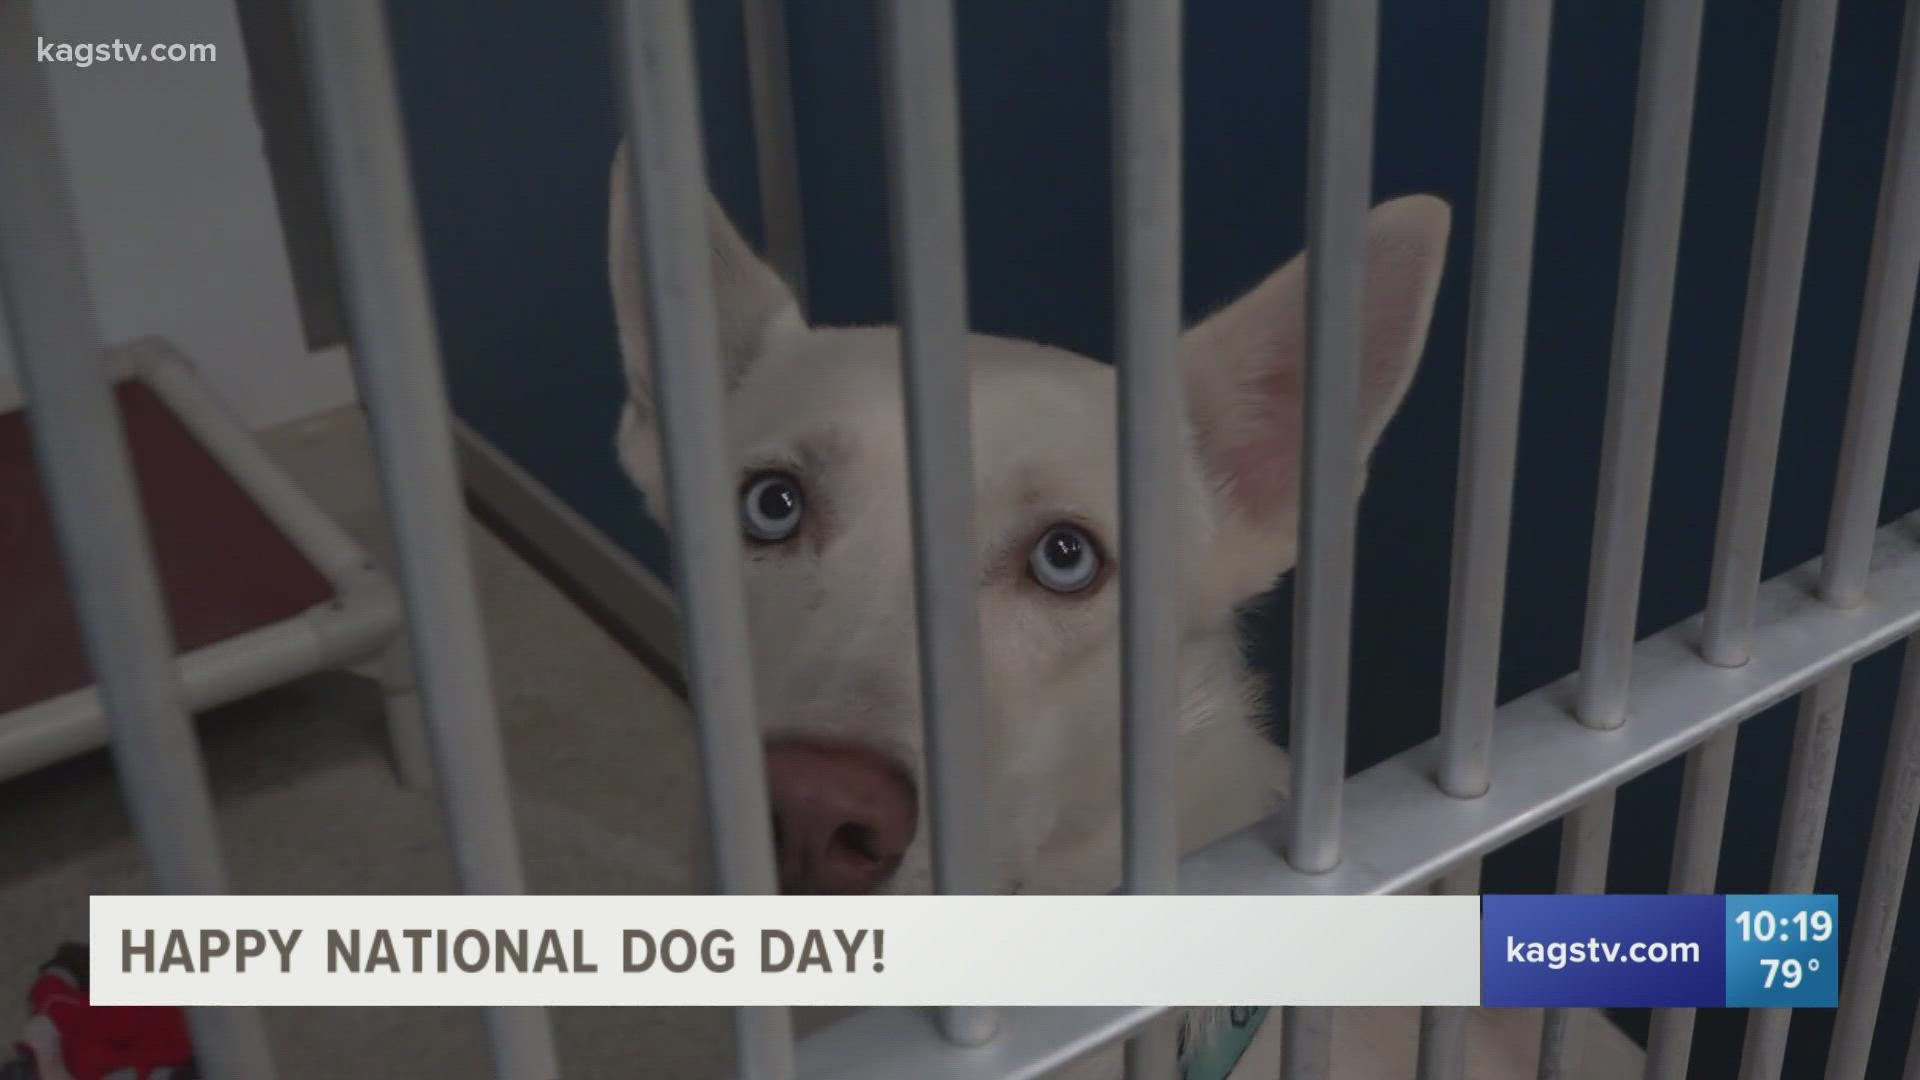 On National Dog Day, many pets are looking for a new home